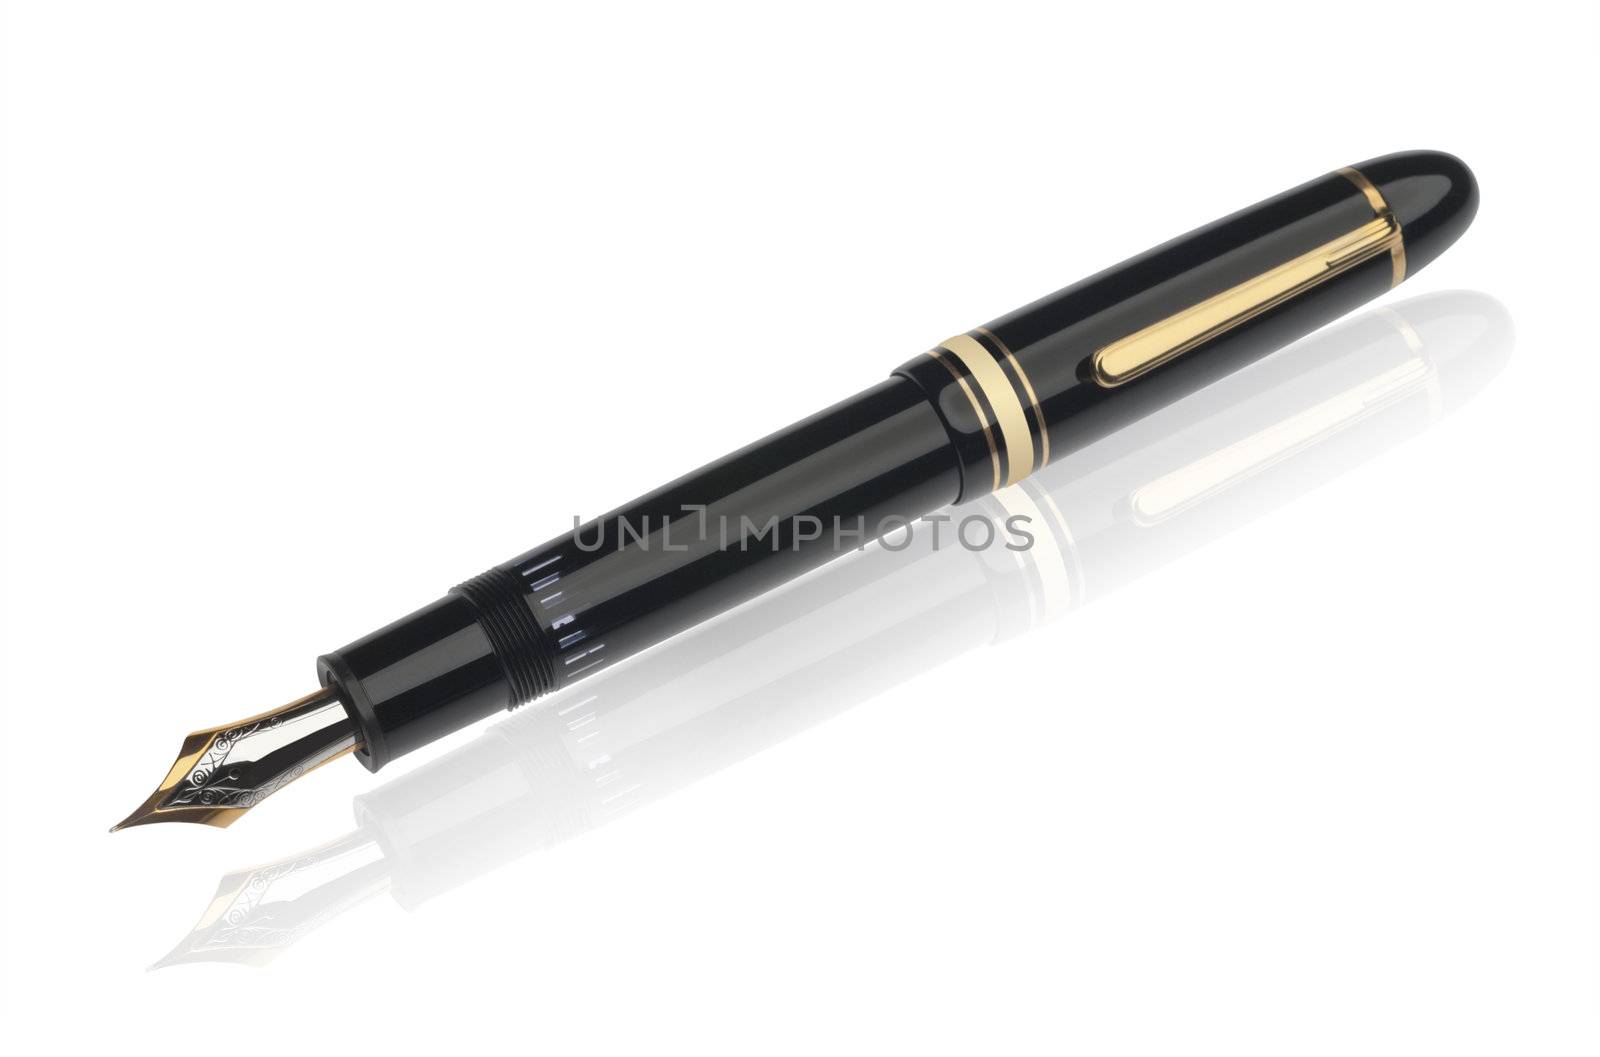 Open fine German fountainpen on white, isolated with clipping path